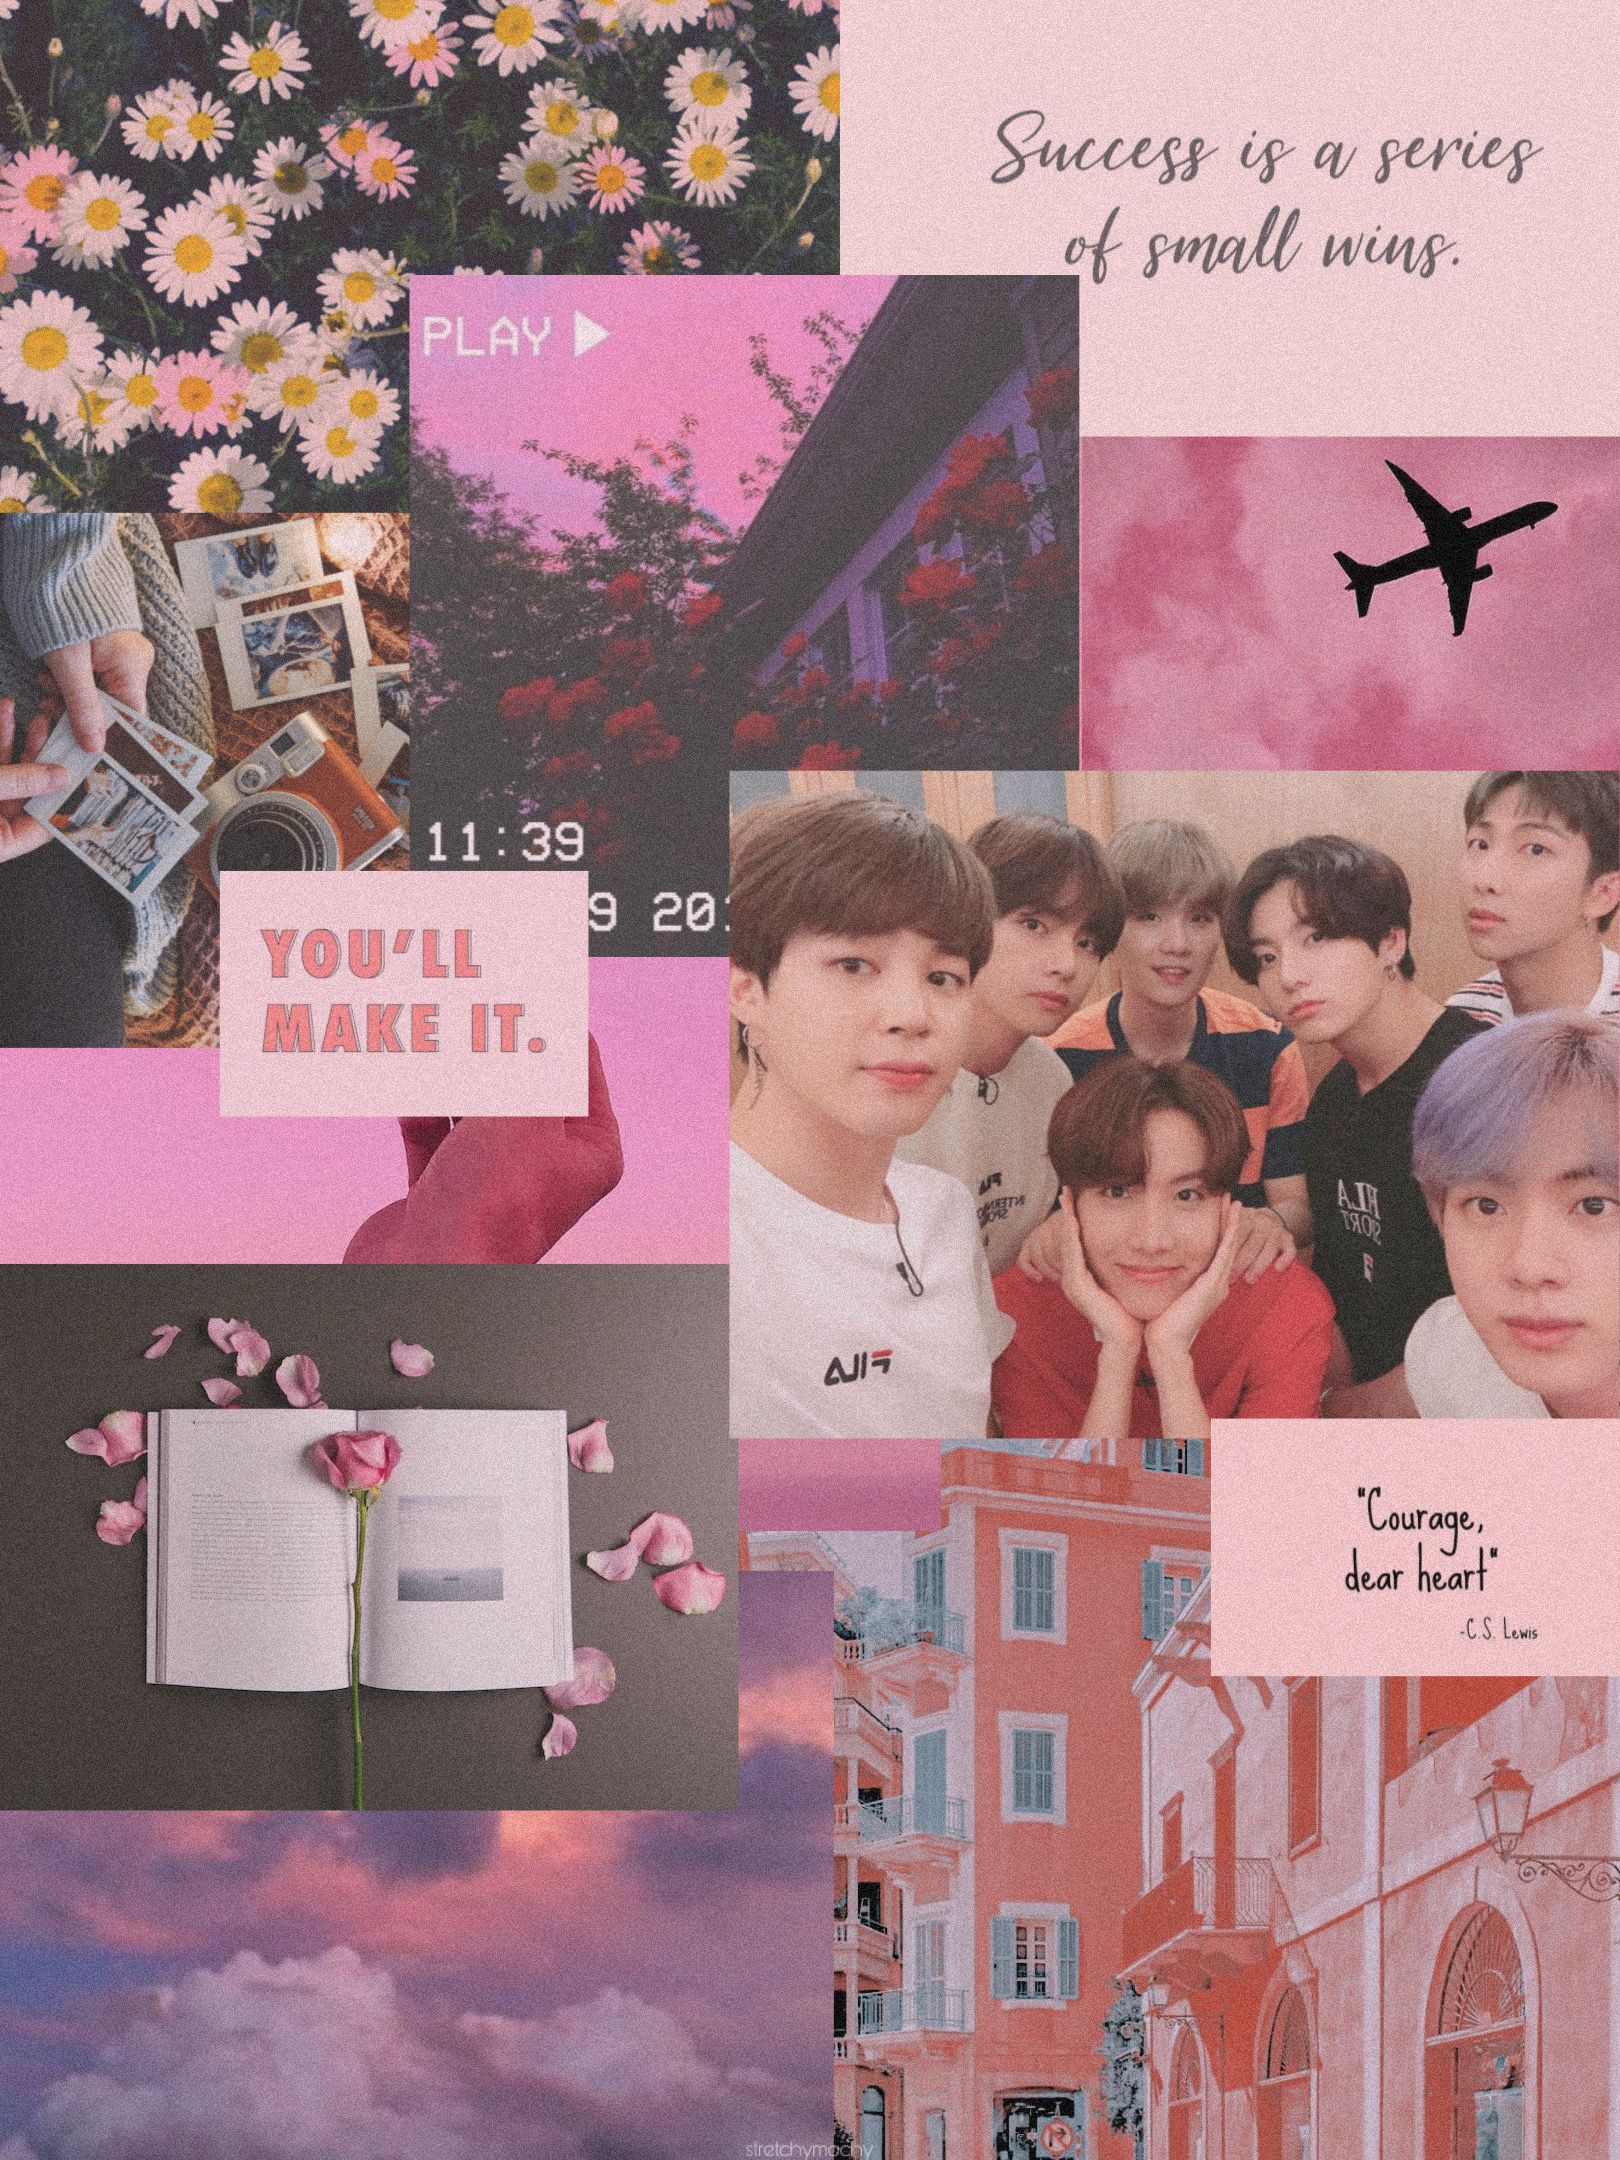 Cool Pink Bts Wallpapers